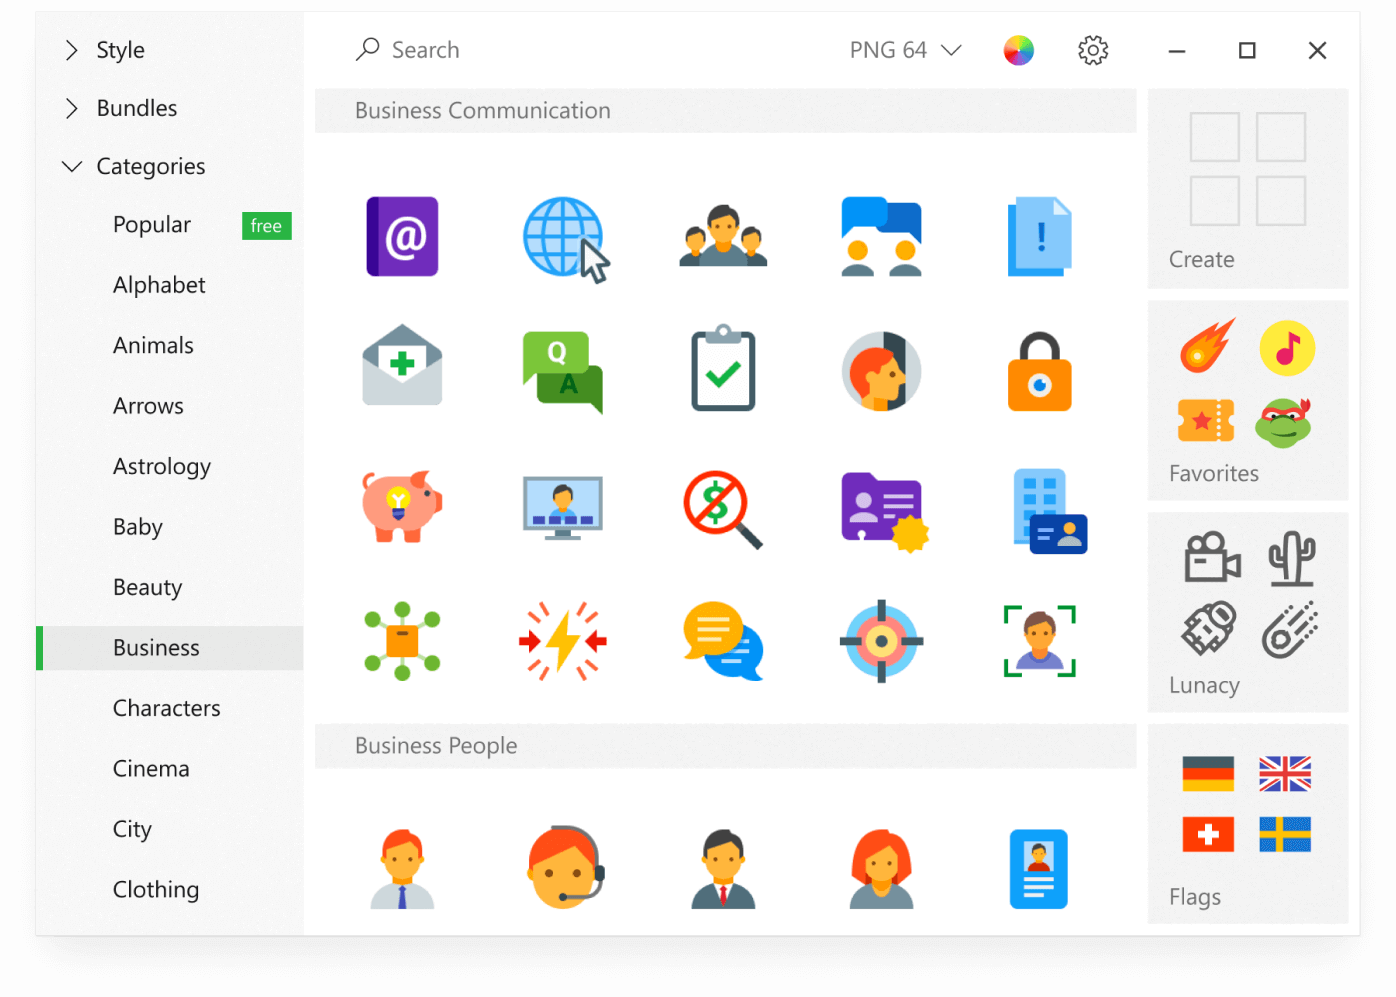 A vast collection of recolorable 135,000+ pixel-perfect icons and curated vector and raster graphics in one single app. Drag & drop the assets into your projects in Figma, Sketch, Lunacy, Photoshop, and Visual Studio.